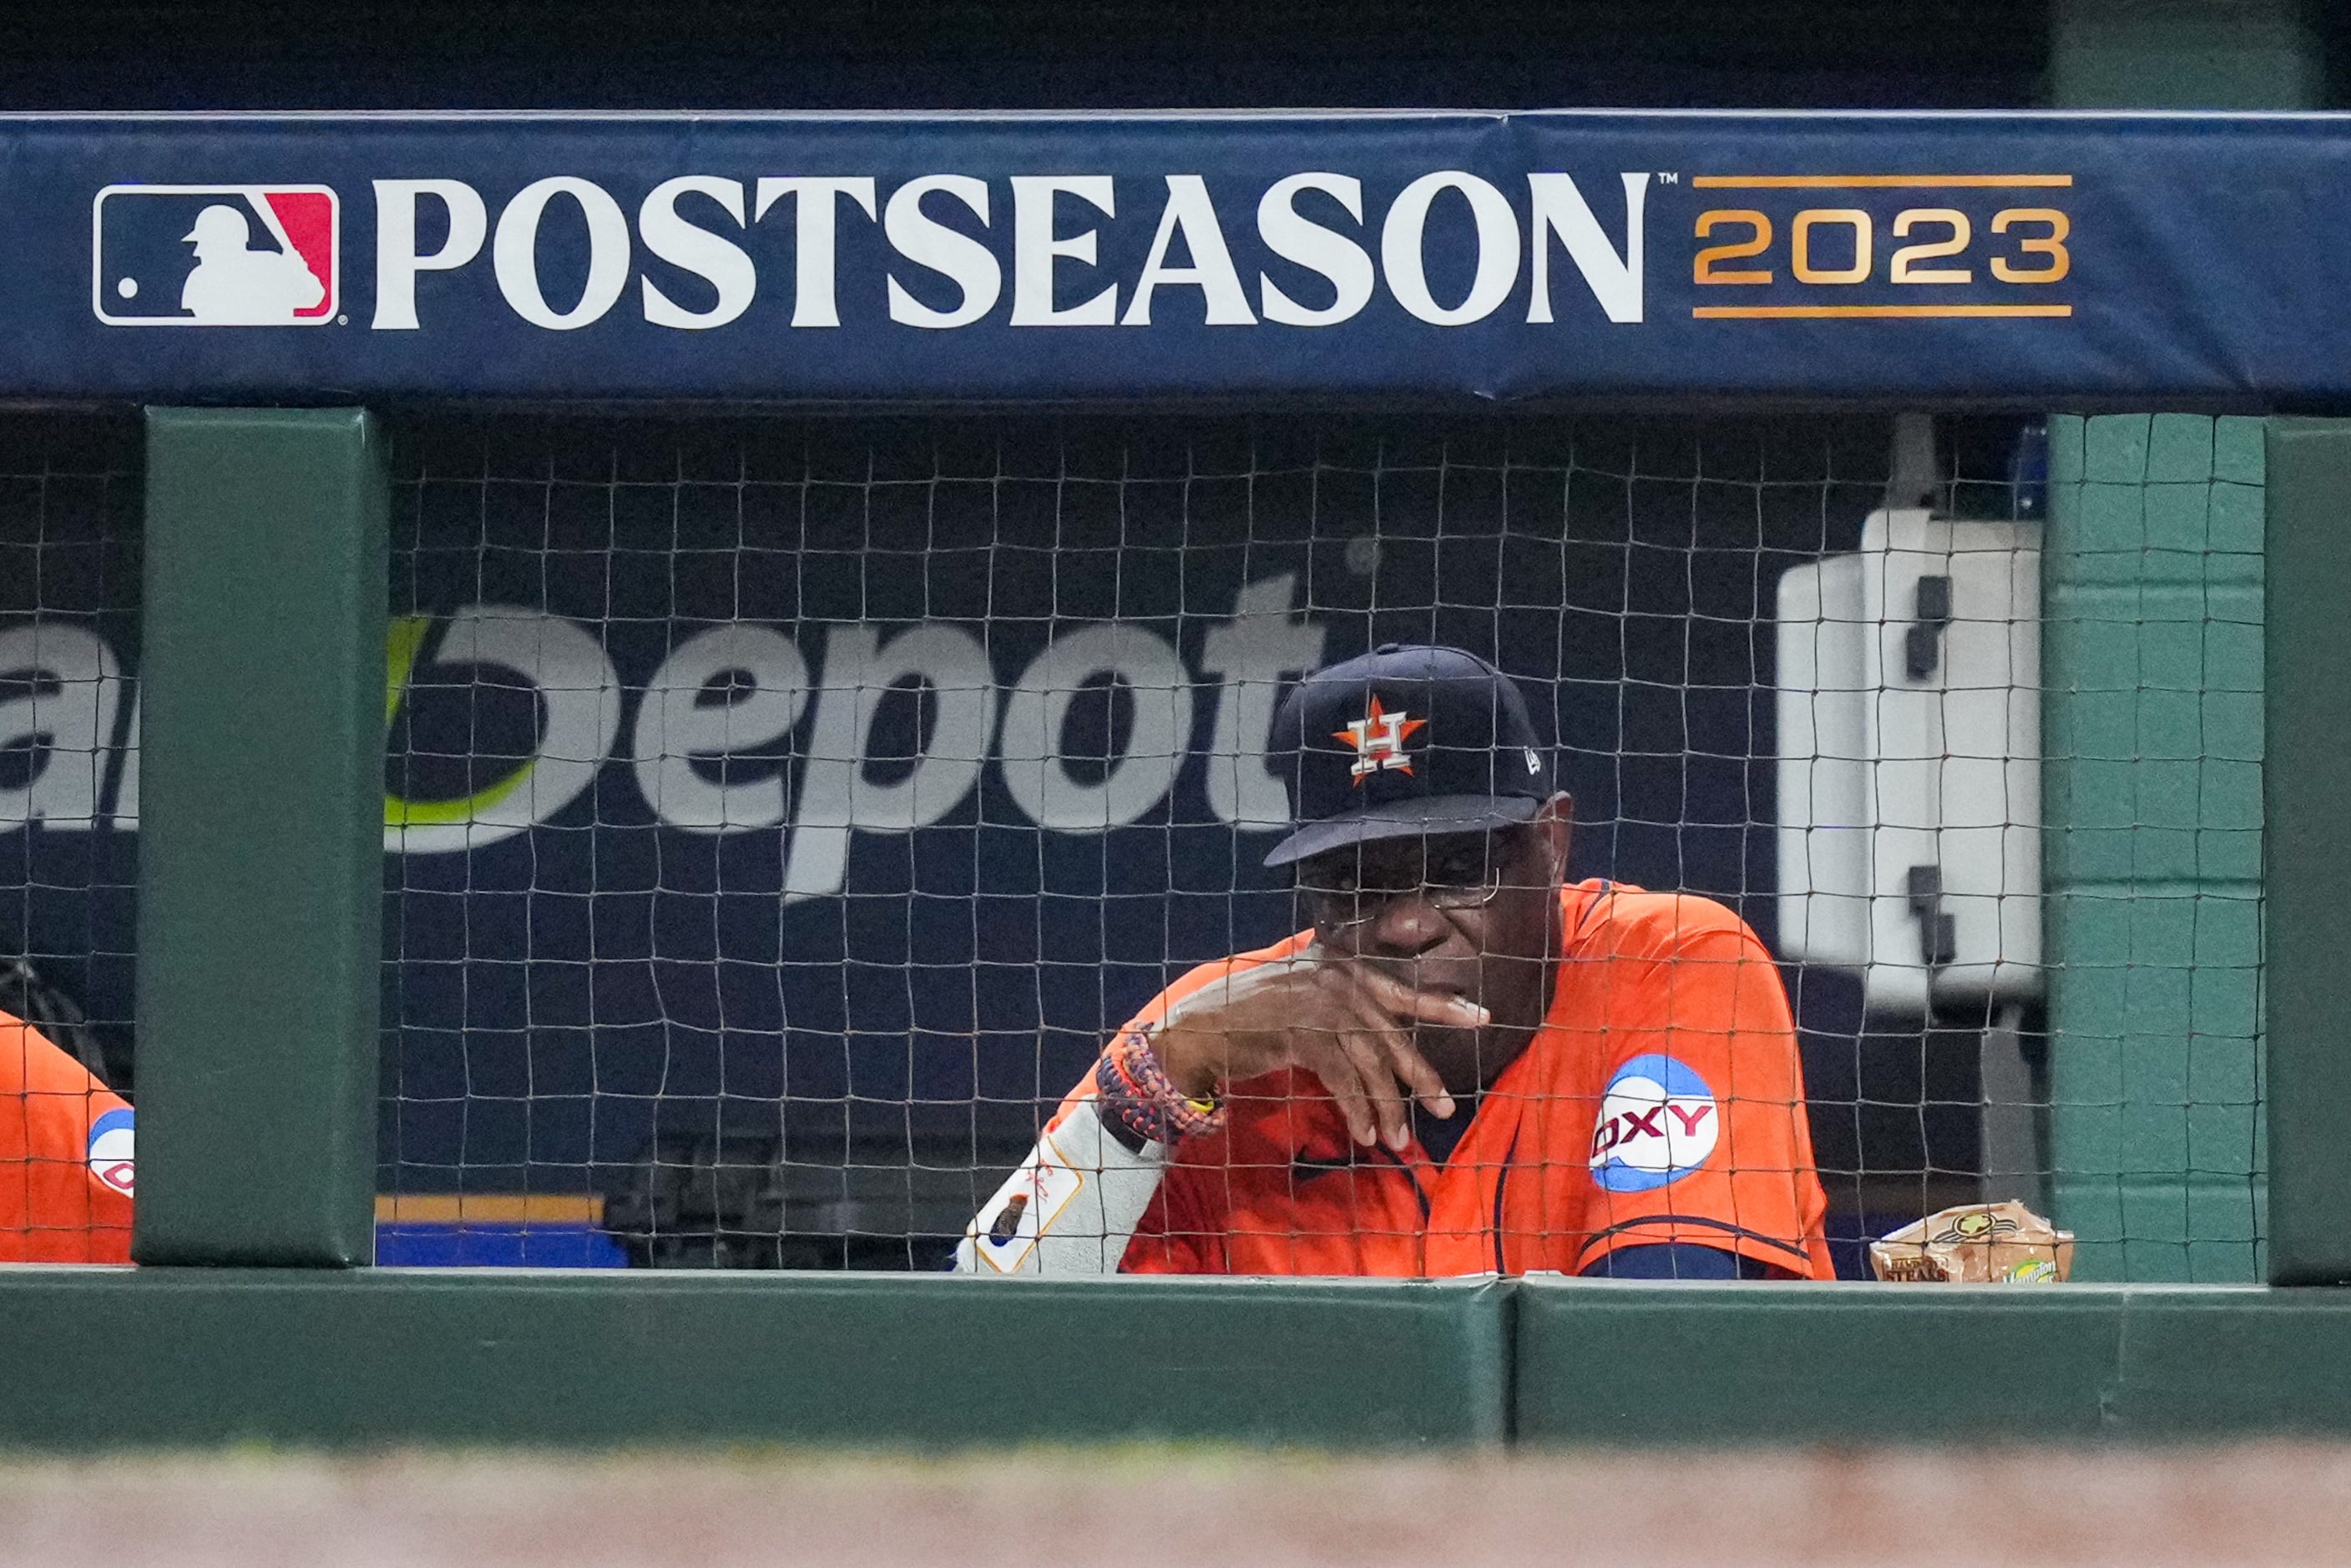 Houston Astros manager Dusty Baker one win away from 2,000